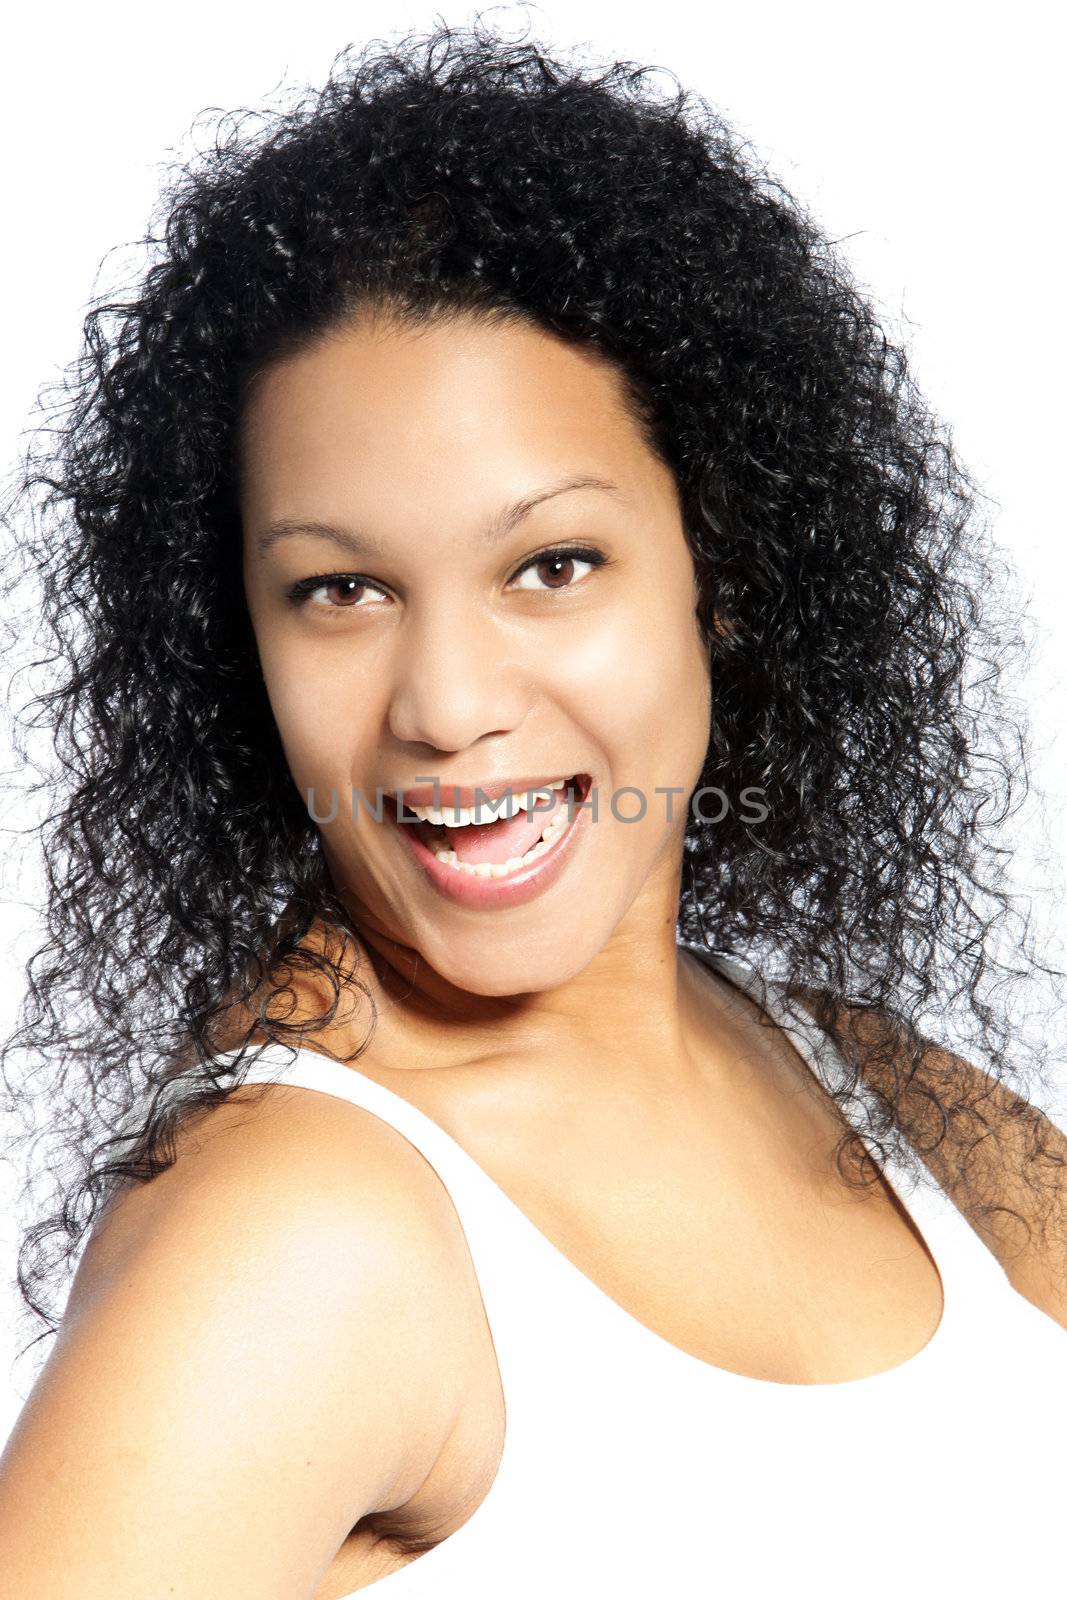 Portrait of happy excited woman with wide smile